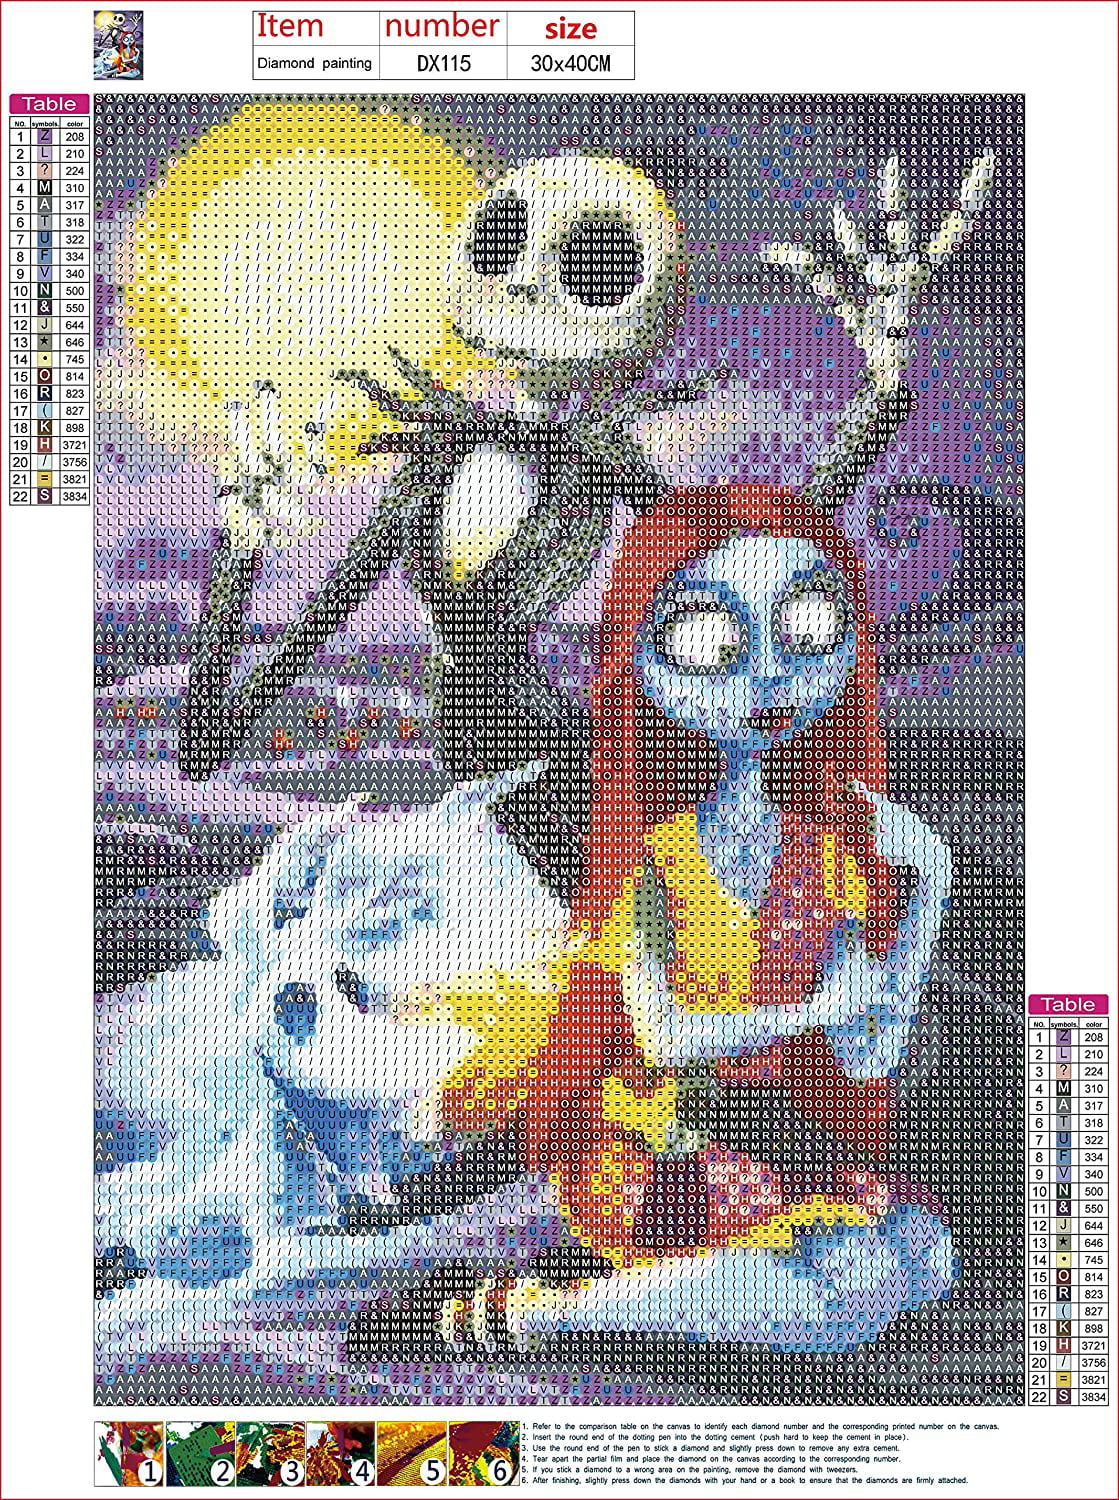 Eitseued Diamond Painting Jack and Sally,Halloween Nightmare Before Christmas Cross Stitch Picture Arts Craft for Home Decor Festival Gift,12x16 inch